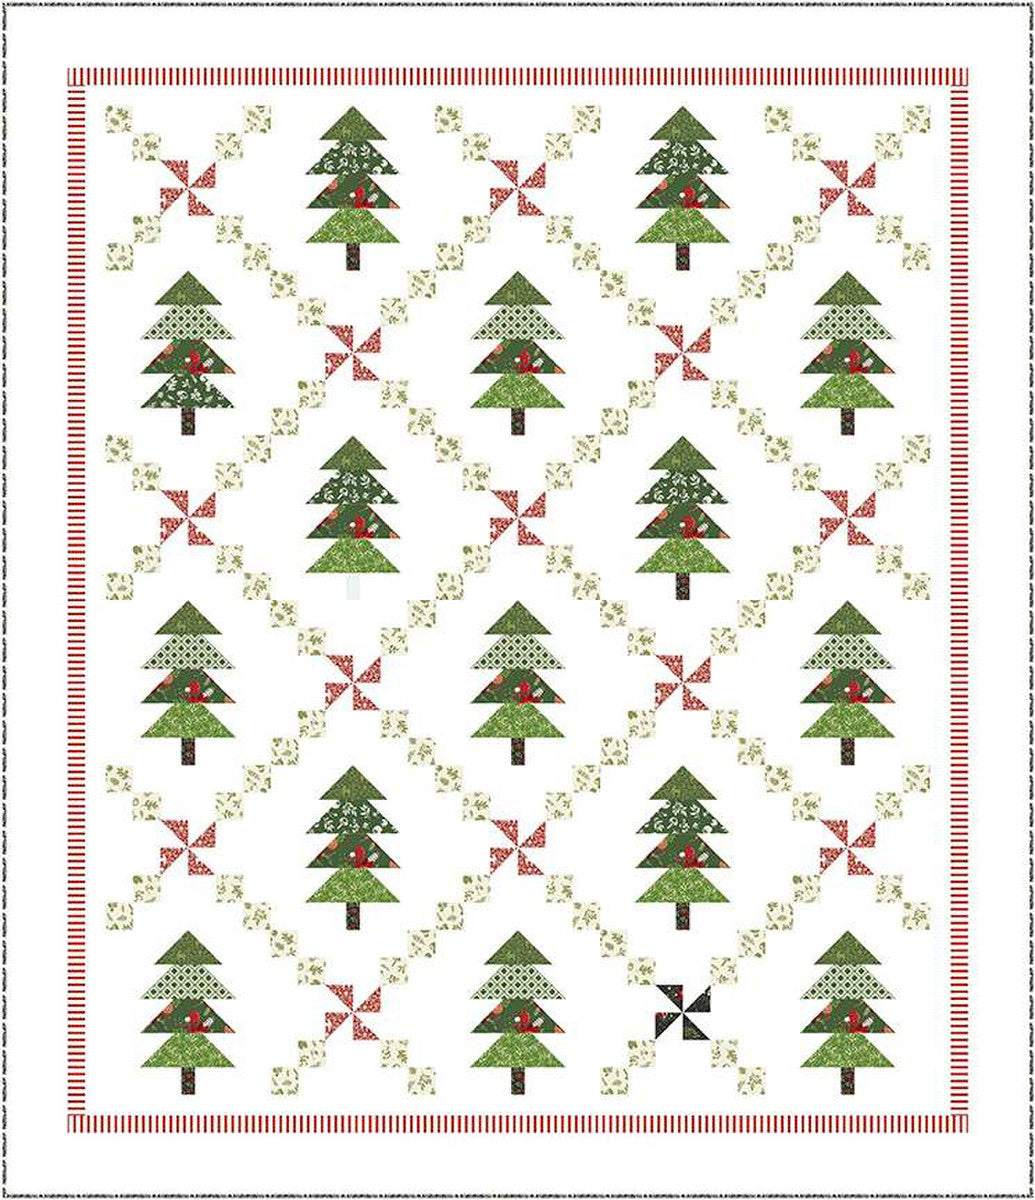 Peppermint Pines Quilt